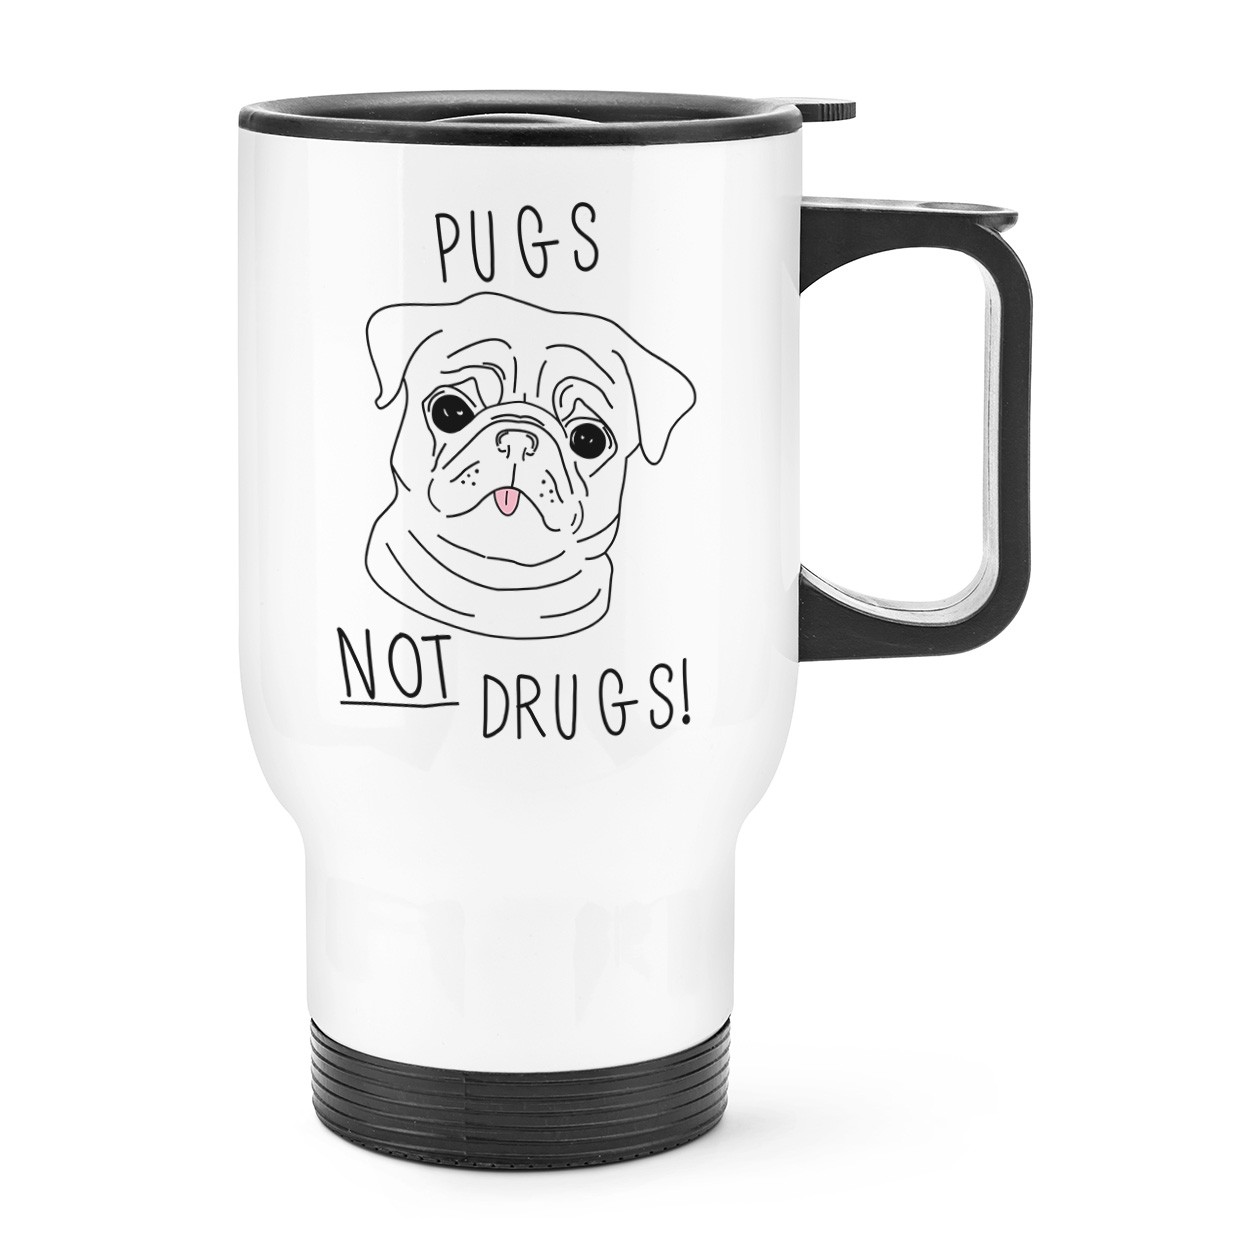 Pugs Not Drugs Travel Mug Cup With Handle